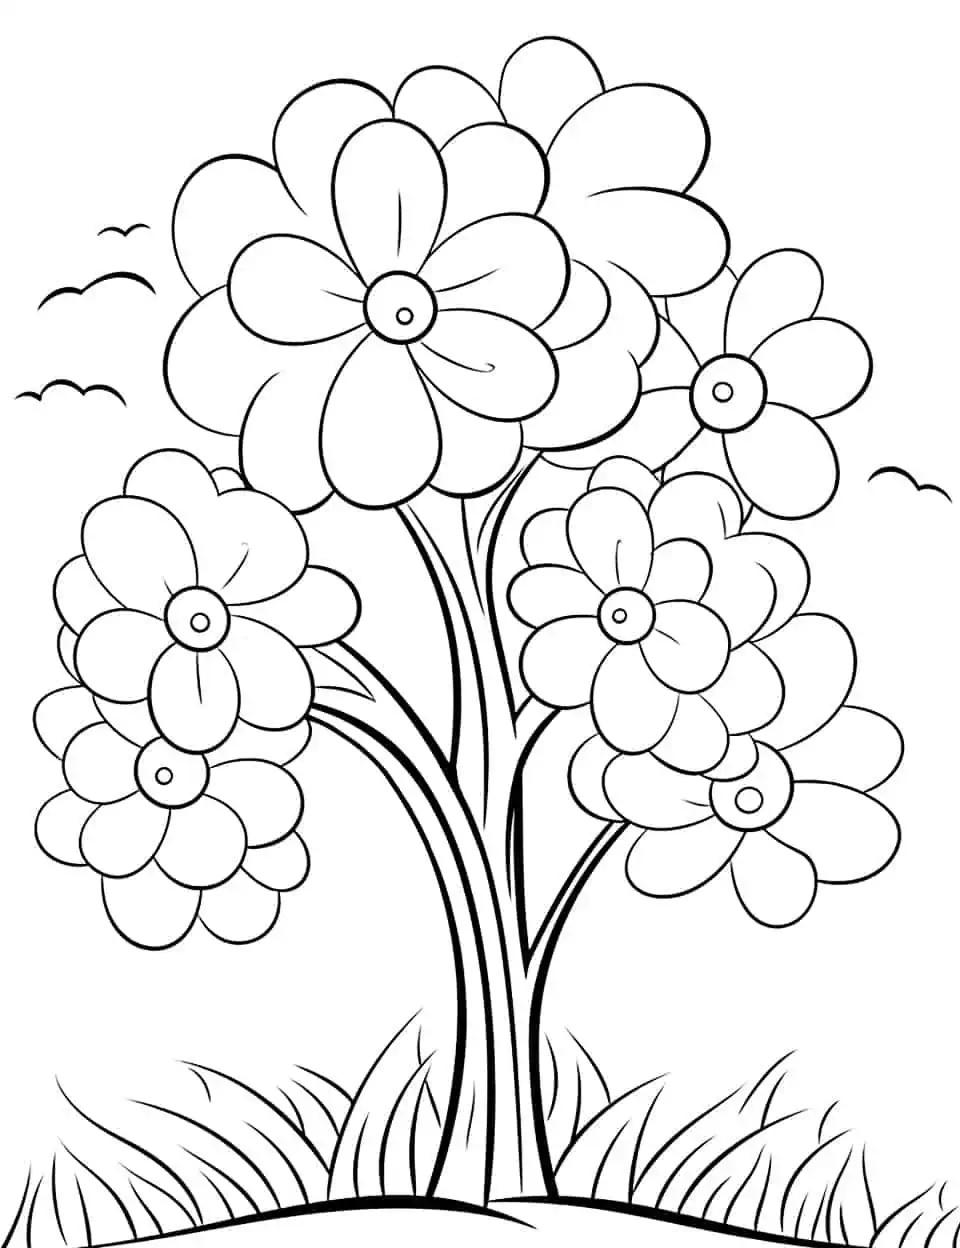 Blooming Spring Tree for Kindergarten Coloring Page - A large, simple coloring page of a tree bursting with spring blossoms for kindergarten kids.